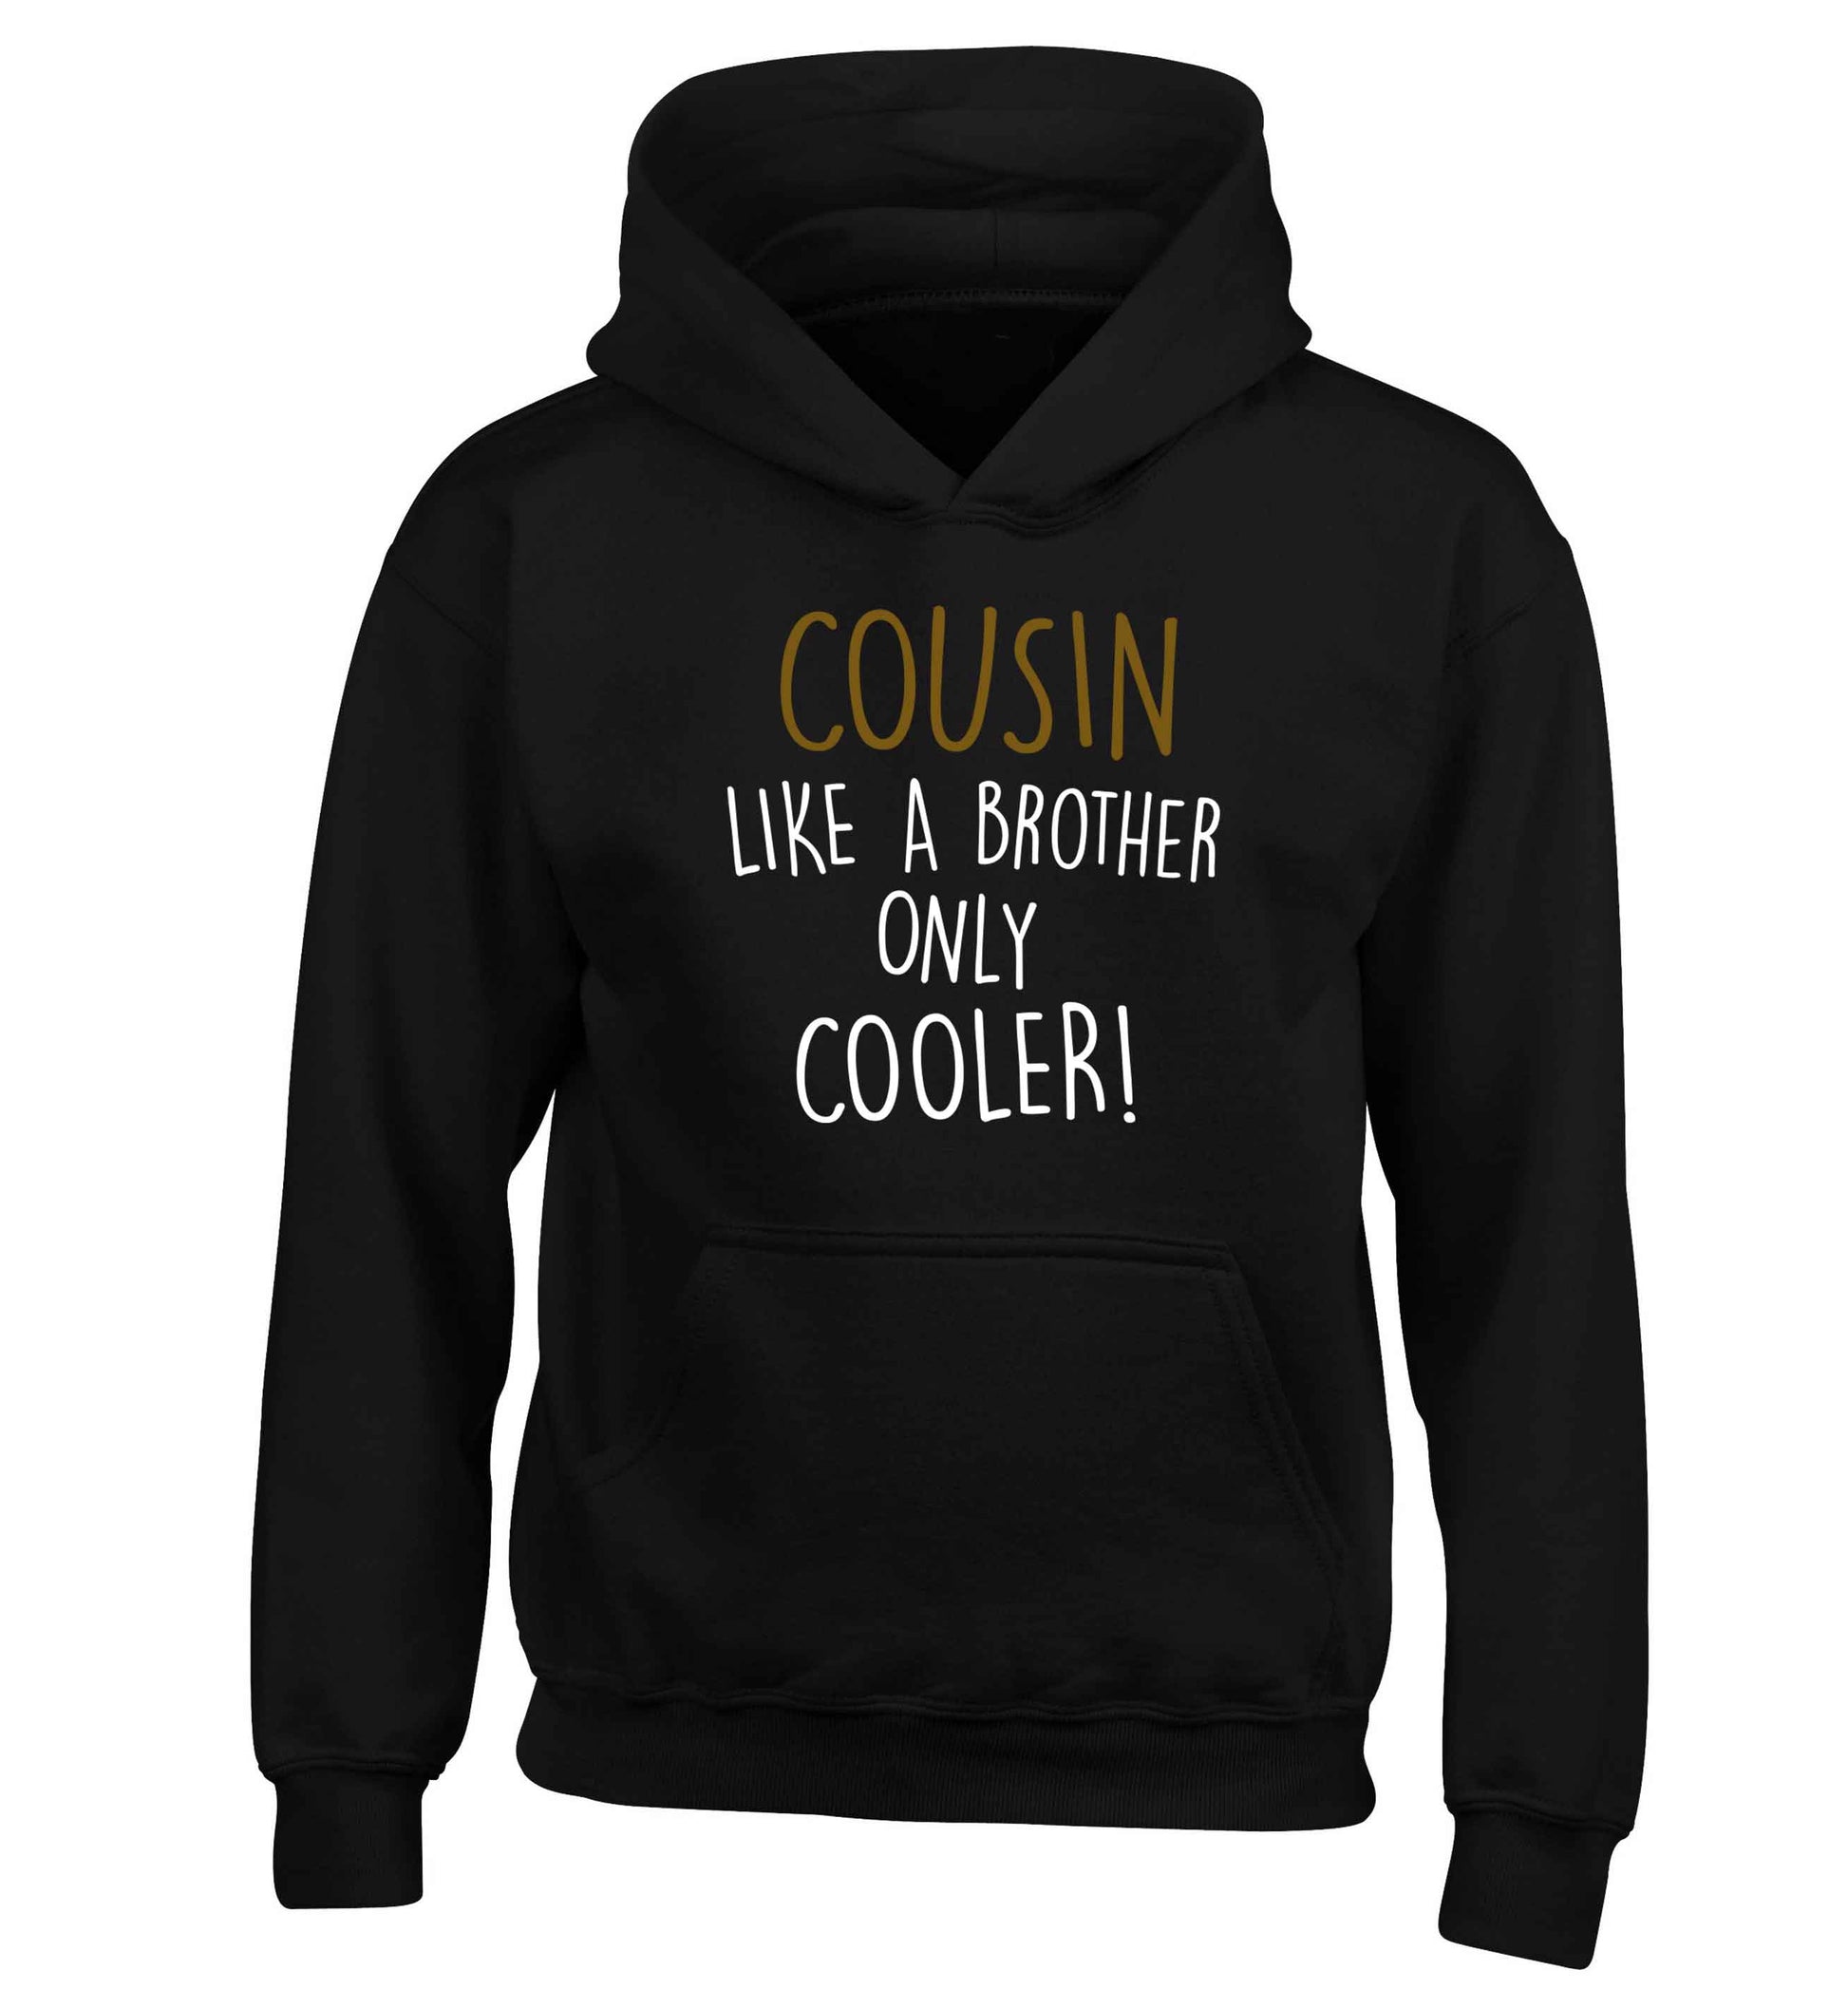 Cousin like a brother only cooler children's black hoodie 12-13 Years